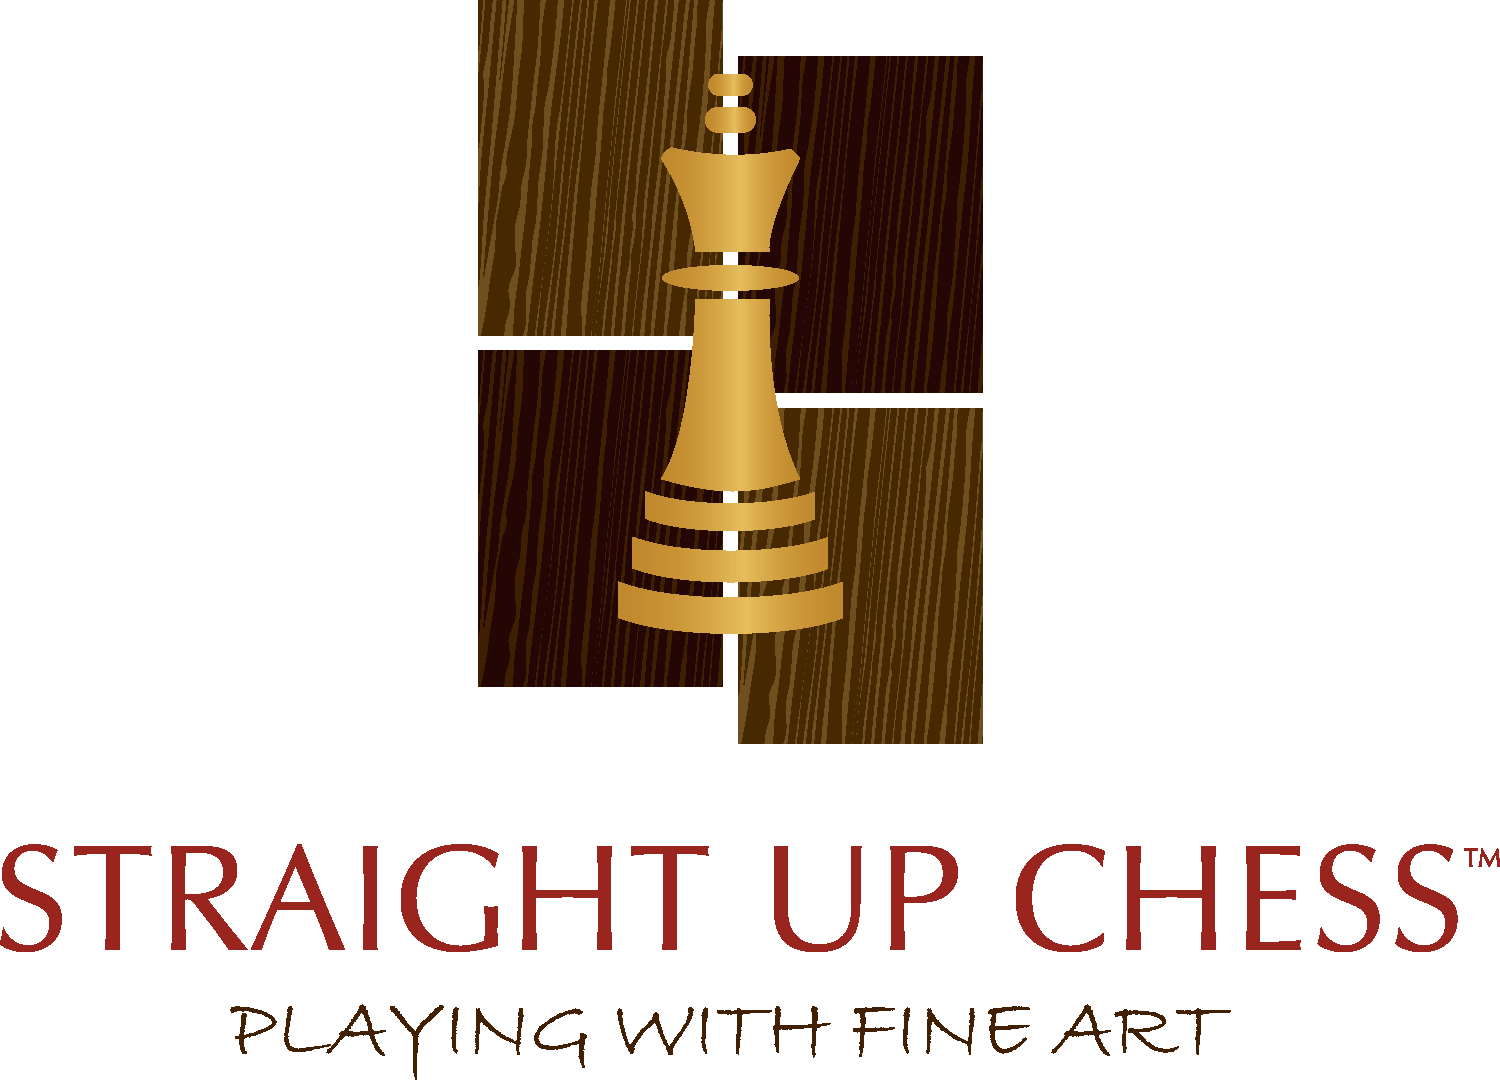 Casual Chess play — Its Your Move Games